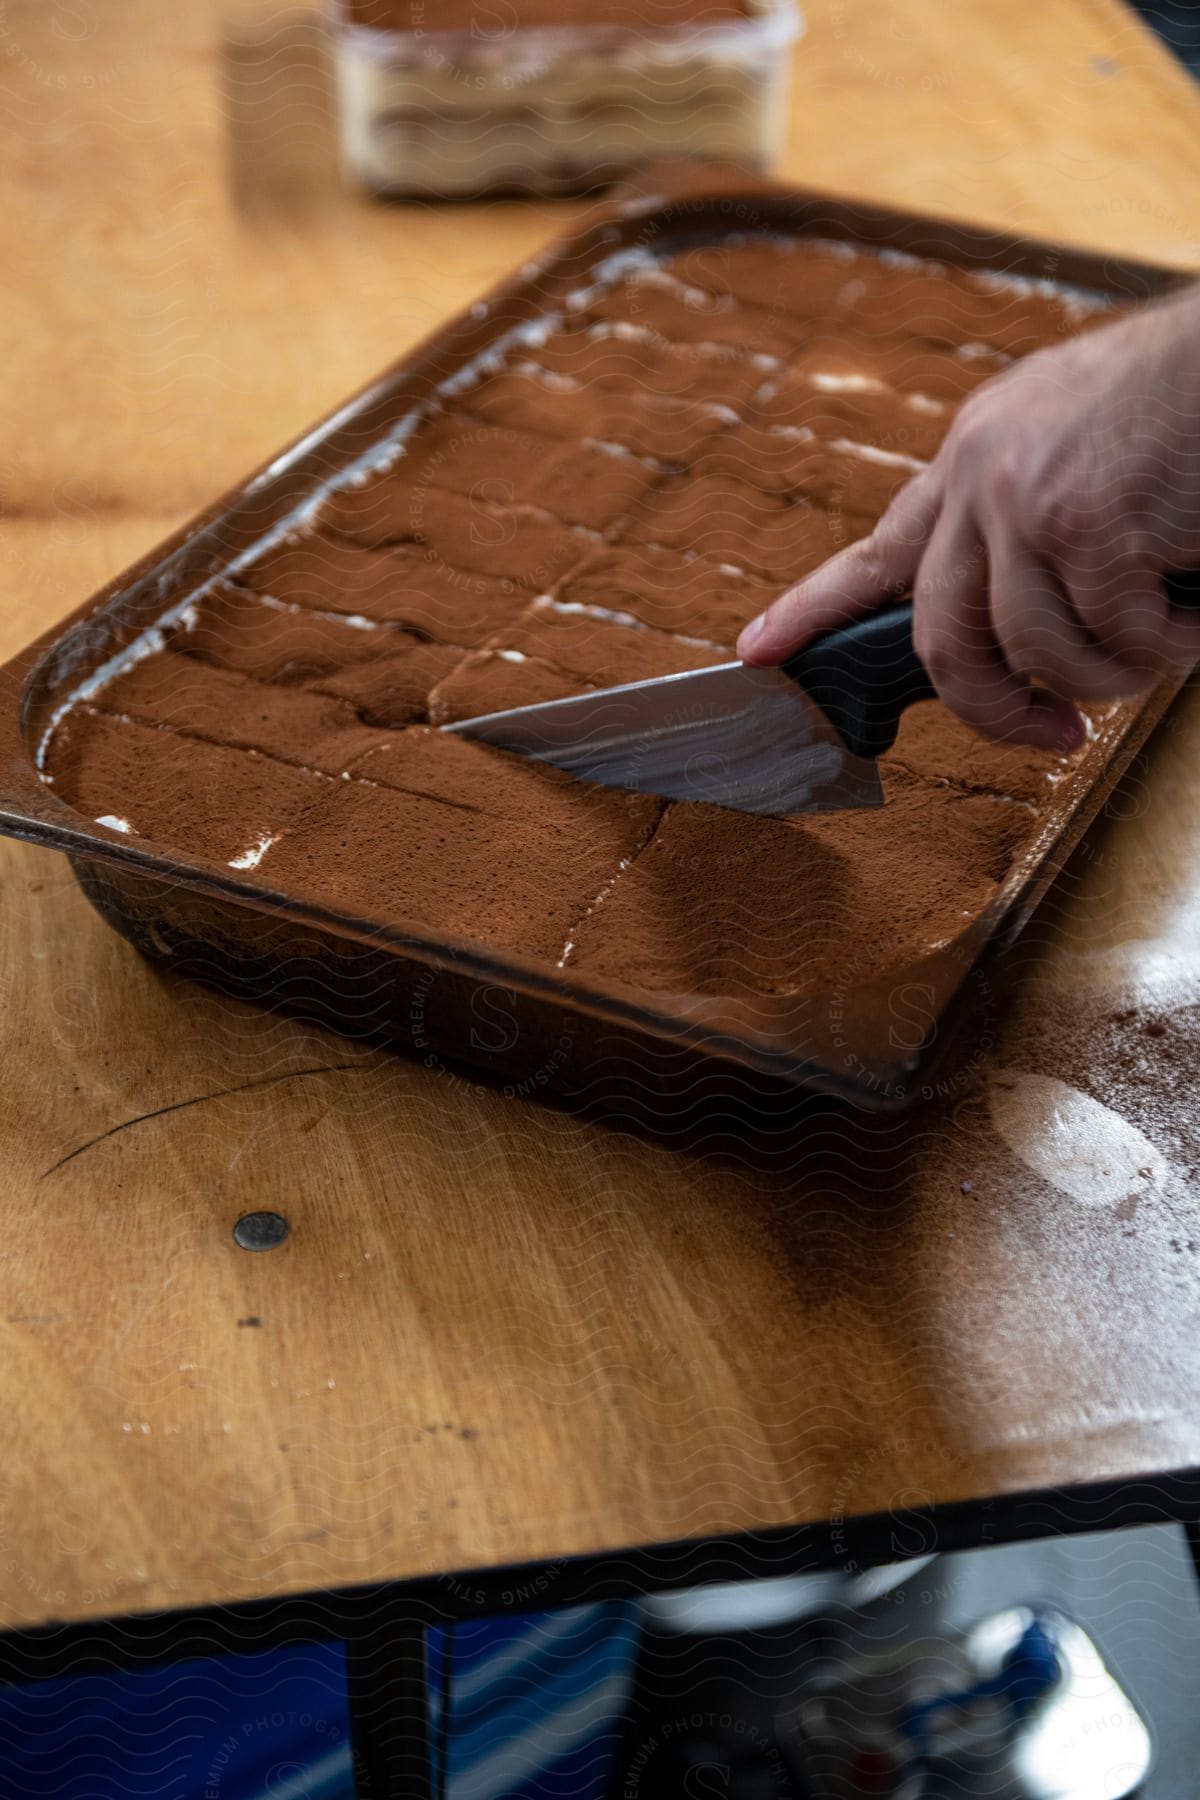 A human hand using a knife to cut a cake that is in a rectangular shape on a wooden table